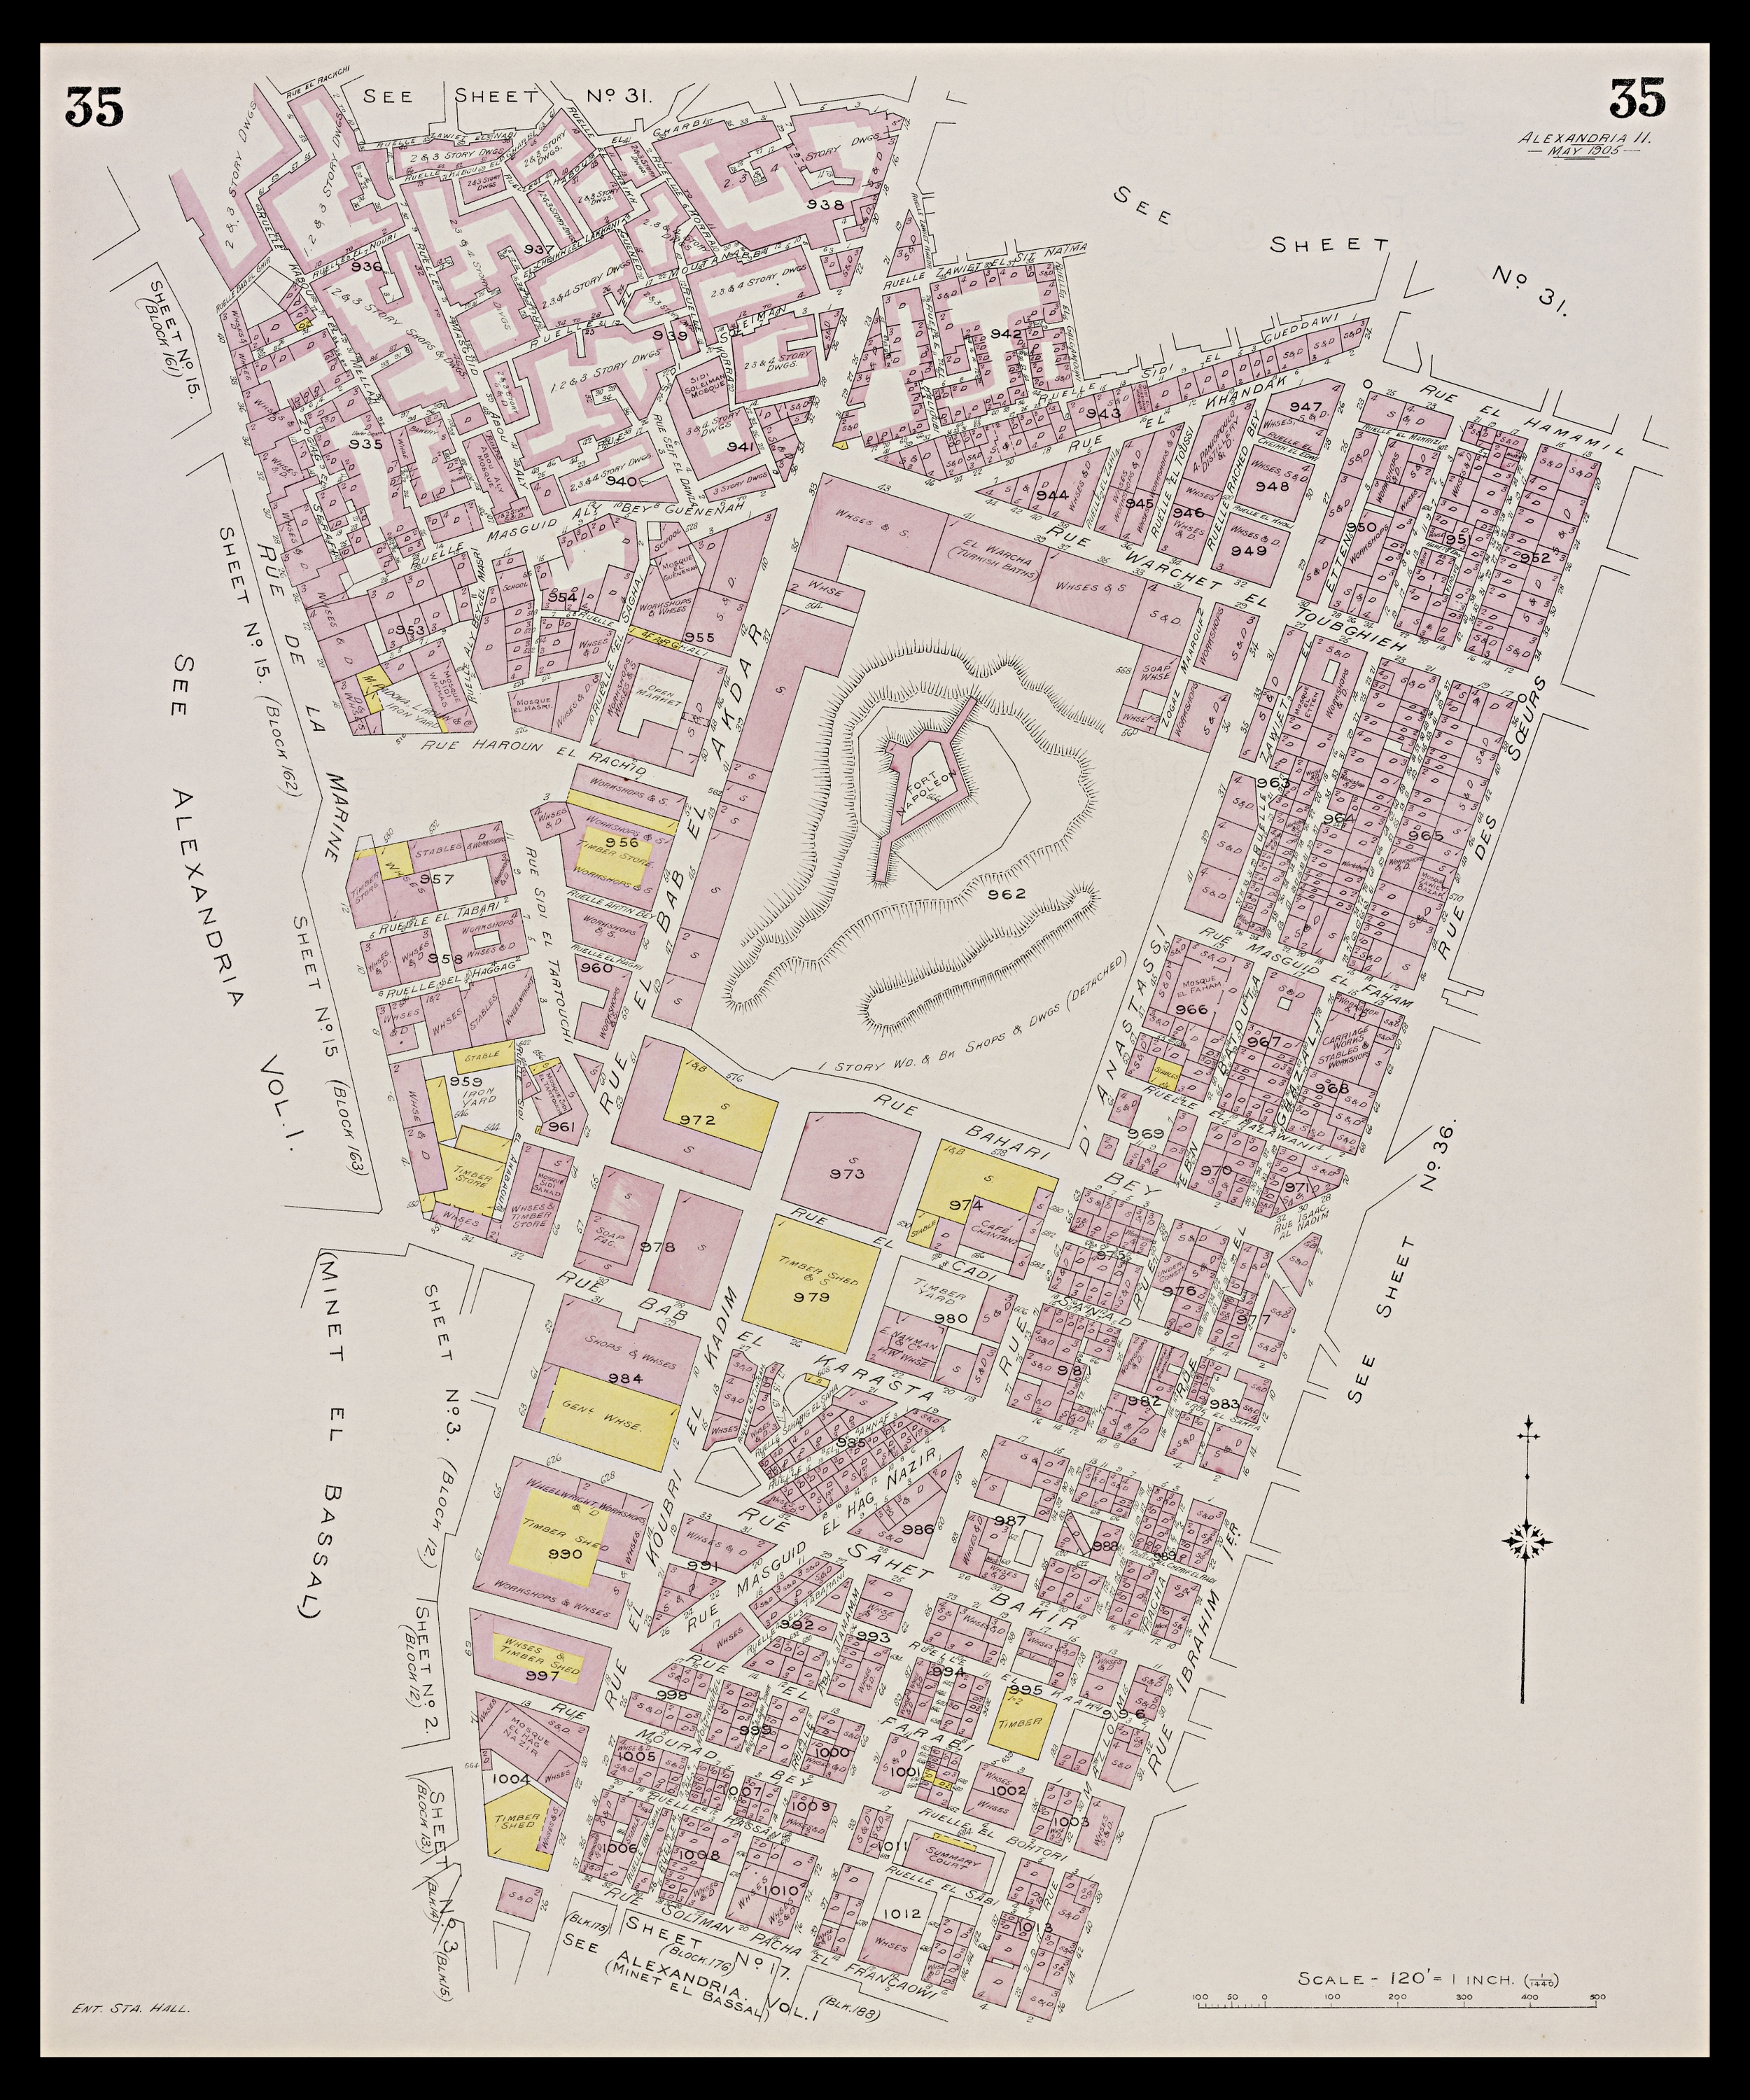 Alexandria  - A sheet from the&nbsp;<span style="font-style: italic;">Insurance Plan of Alexandria</span>. The complete set of plans can be found on&nbsp;<a href="https://www.archnet.org/publications/10217/" target="_blank" data-bypass="true">Archnet</a>, or as georeferenced versions in the&nbsp;<a href="http://calvert.hul.harvard.edu:8080/opengeoportal/openGeoPortalHome.jsp?BasicSearchTerm=ExternalLayerId:1203" target="_blank" data-bypass="true">Harvard Geospatial Library</a>.